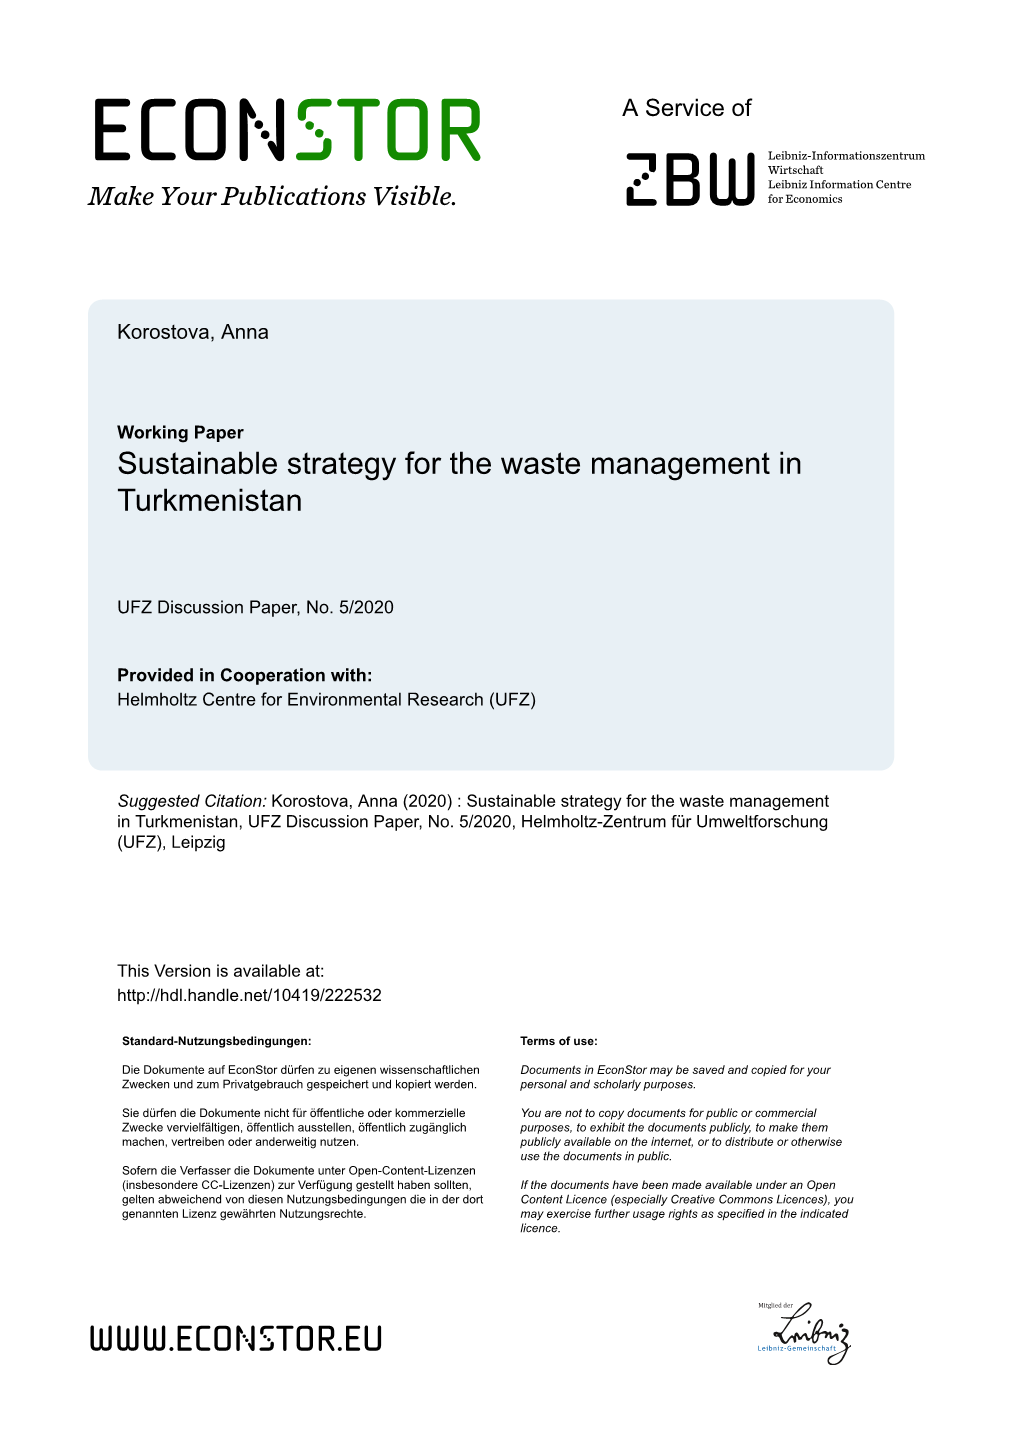 Sustainable Strategy for the Waste Management in Turkmenistan